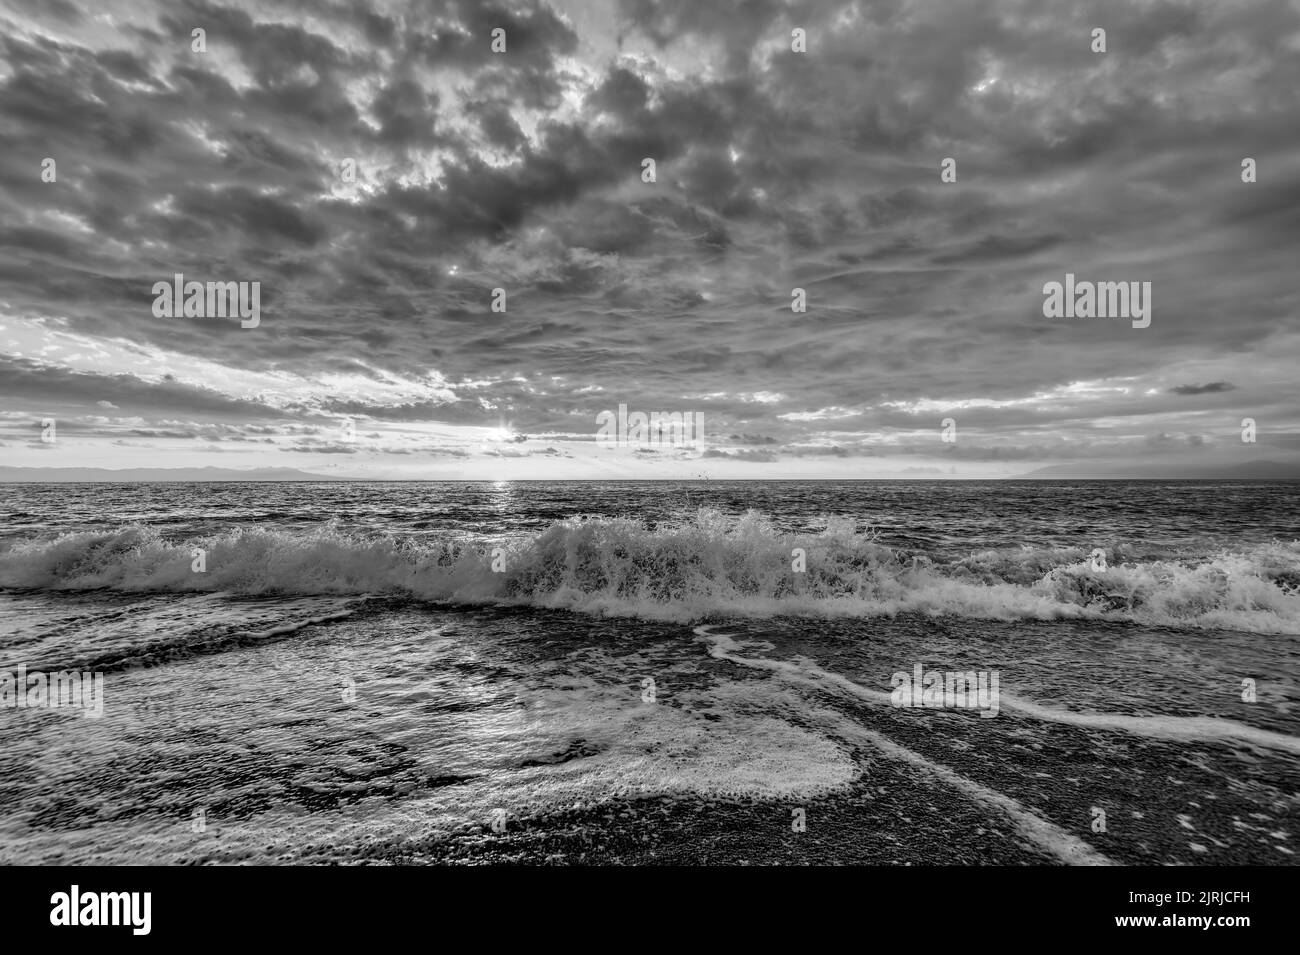 An Ocean Wave Is Breaking Against A Colorful Sunset Sky Black And White Stock Photo